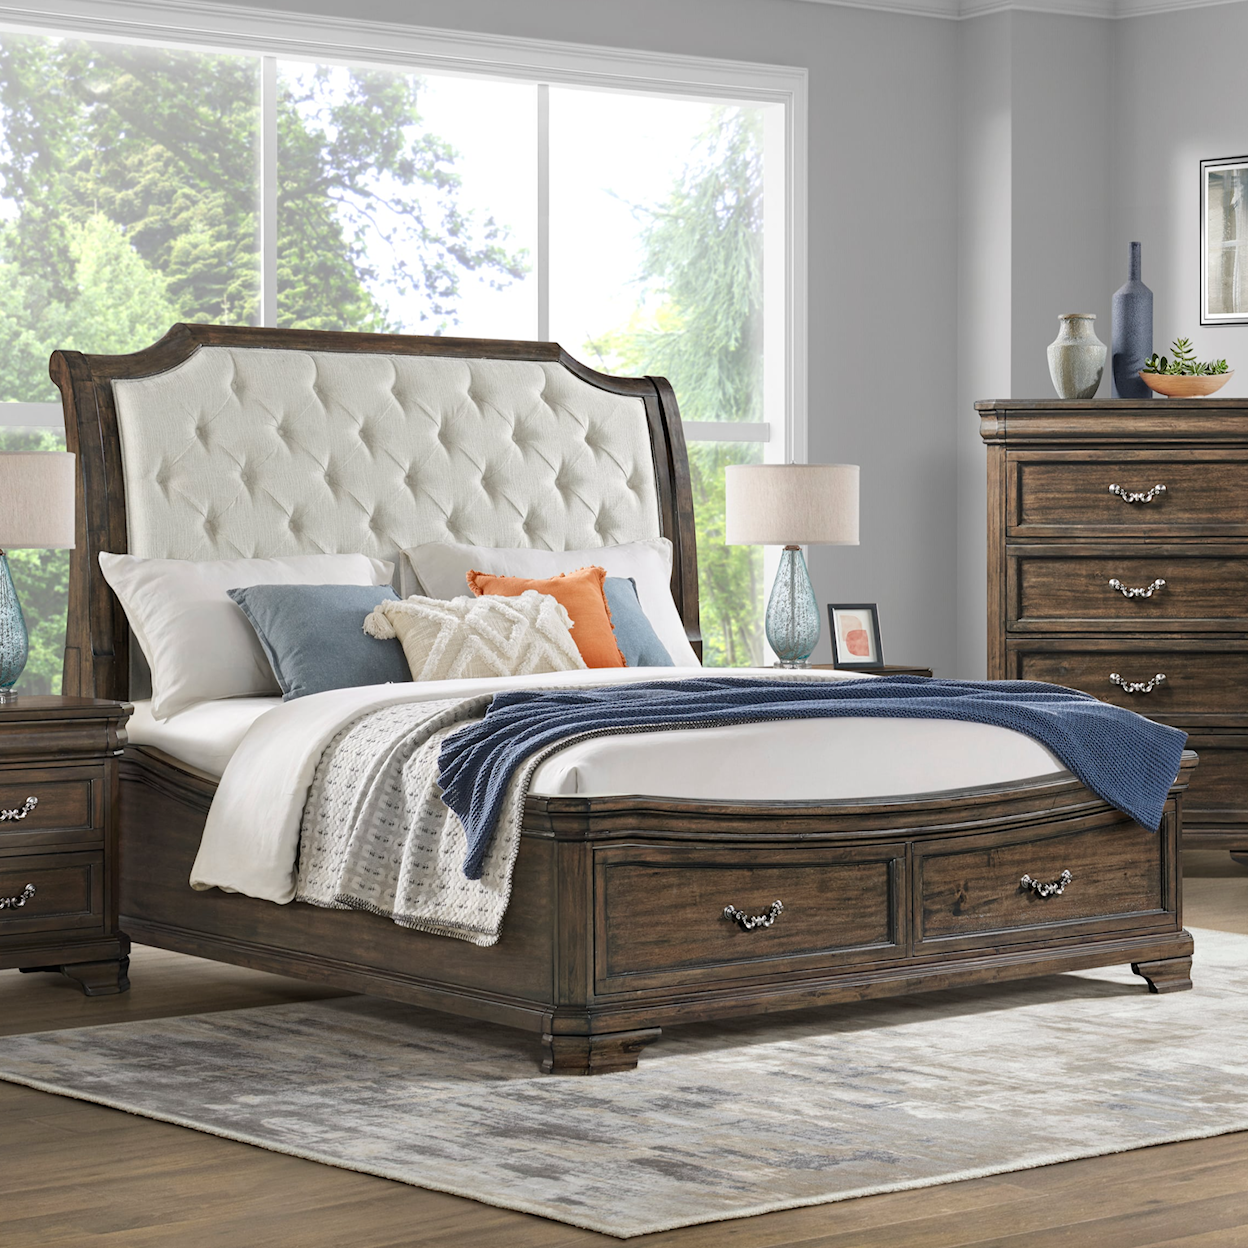 New Classic Furniture Lyndhurst Queen Upholstered Bed